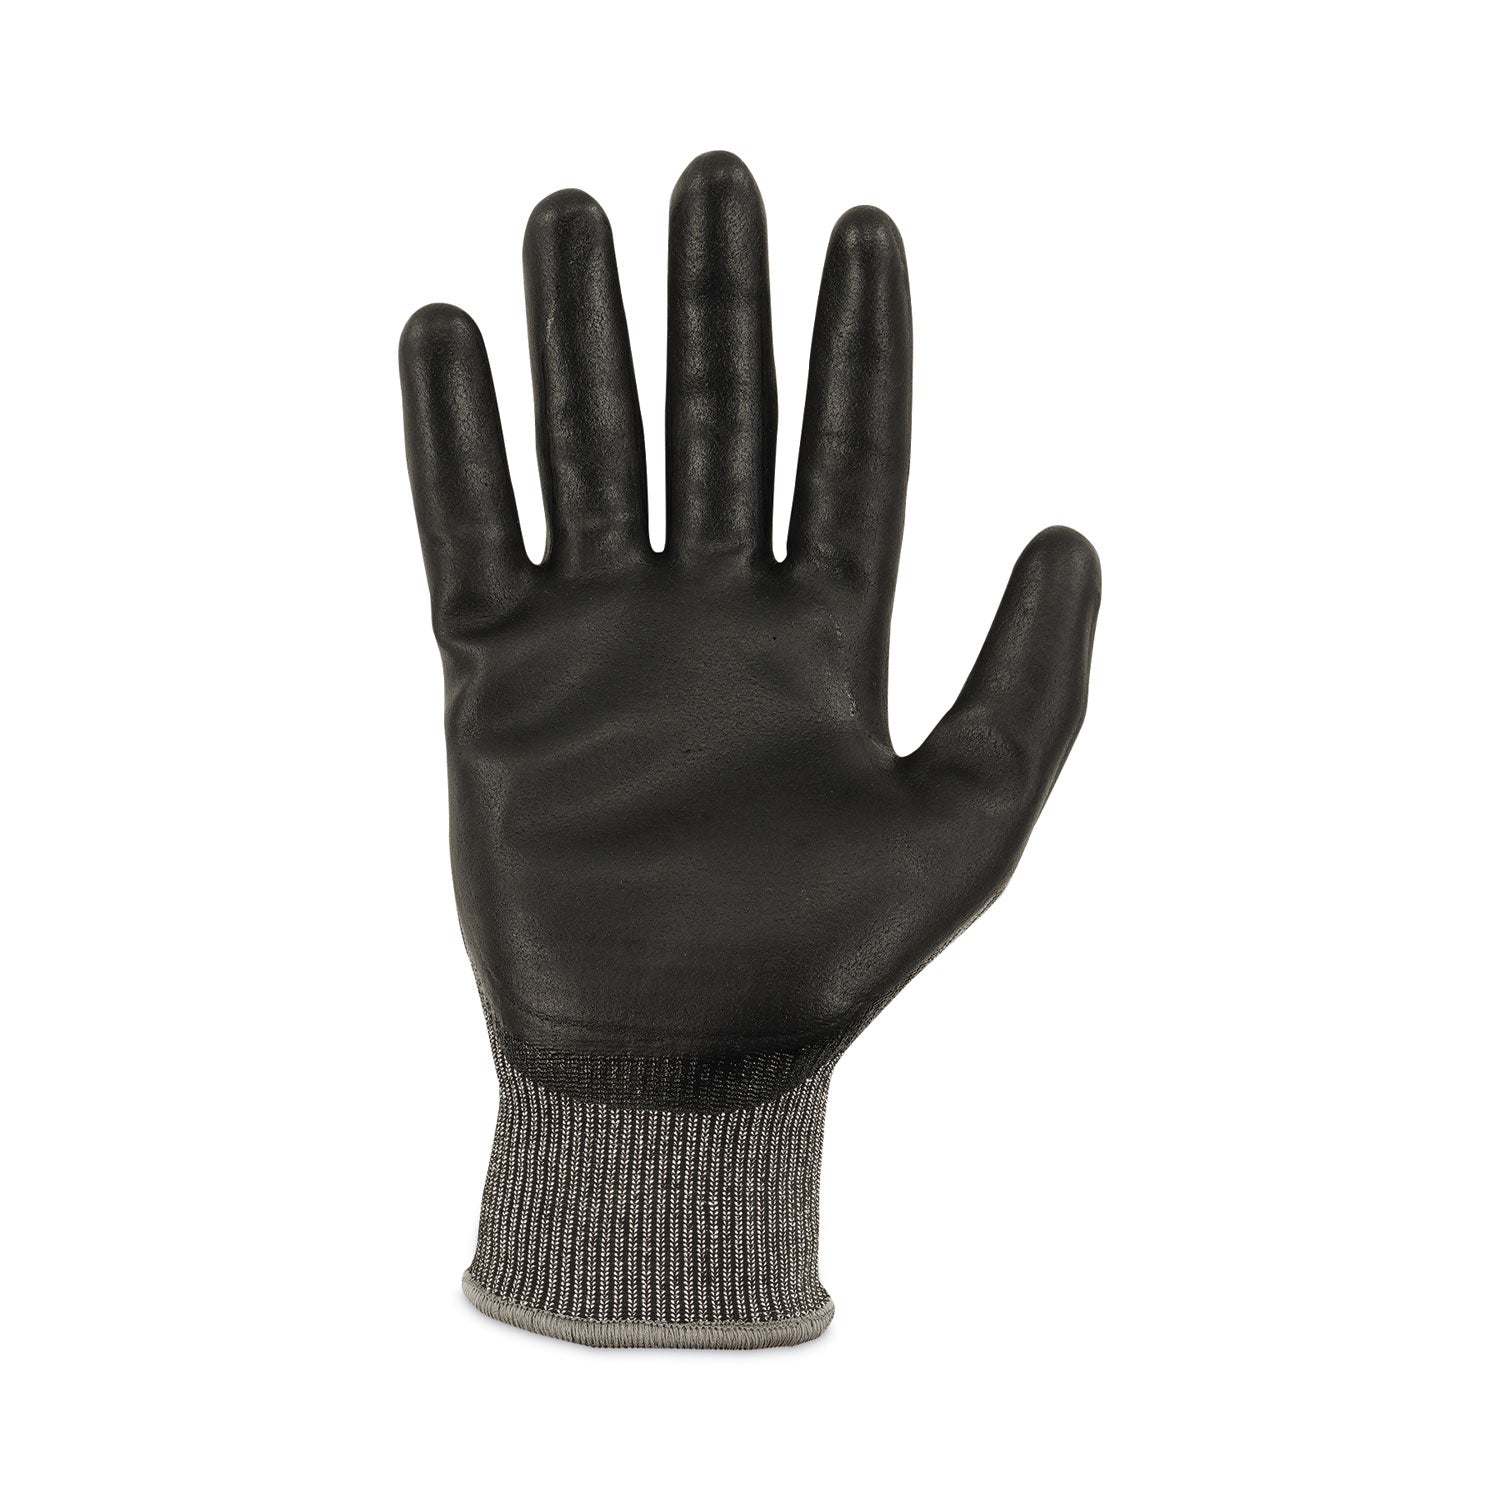 proflex-7072-ansi-a7-nitrile-coated-cr-gloves-gray-small-12-pairs-pack-ships-in-1-3-business-days_ego10302 - 7